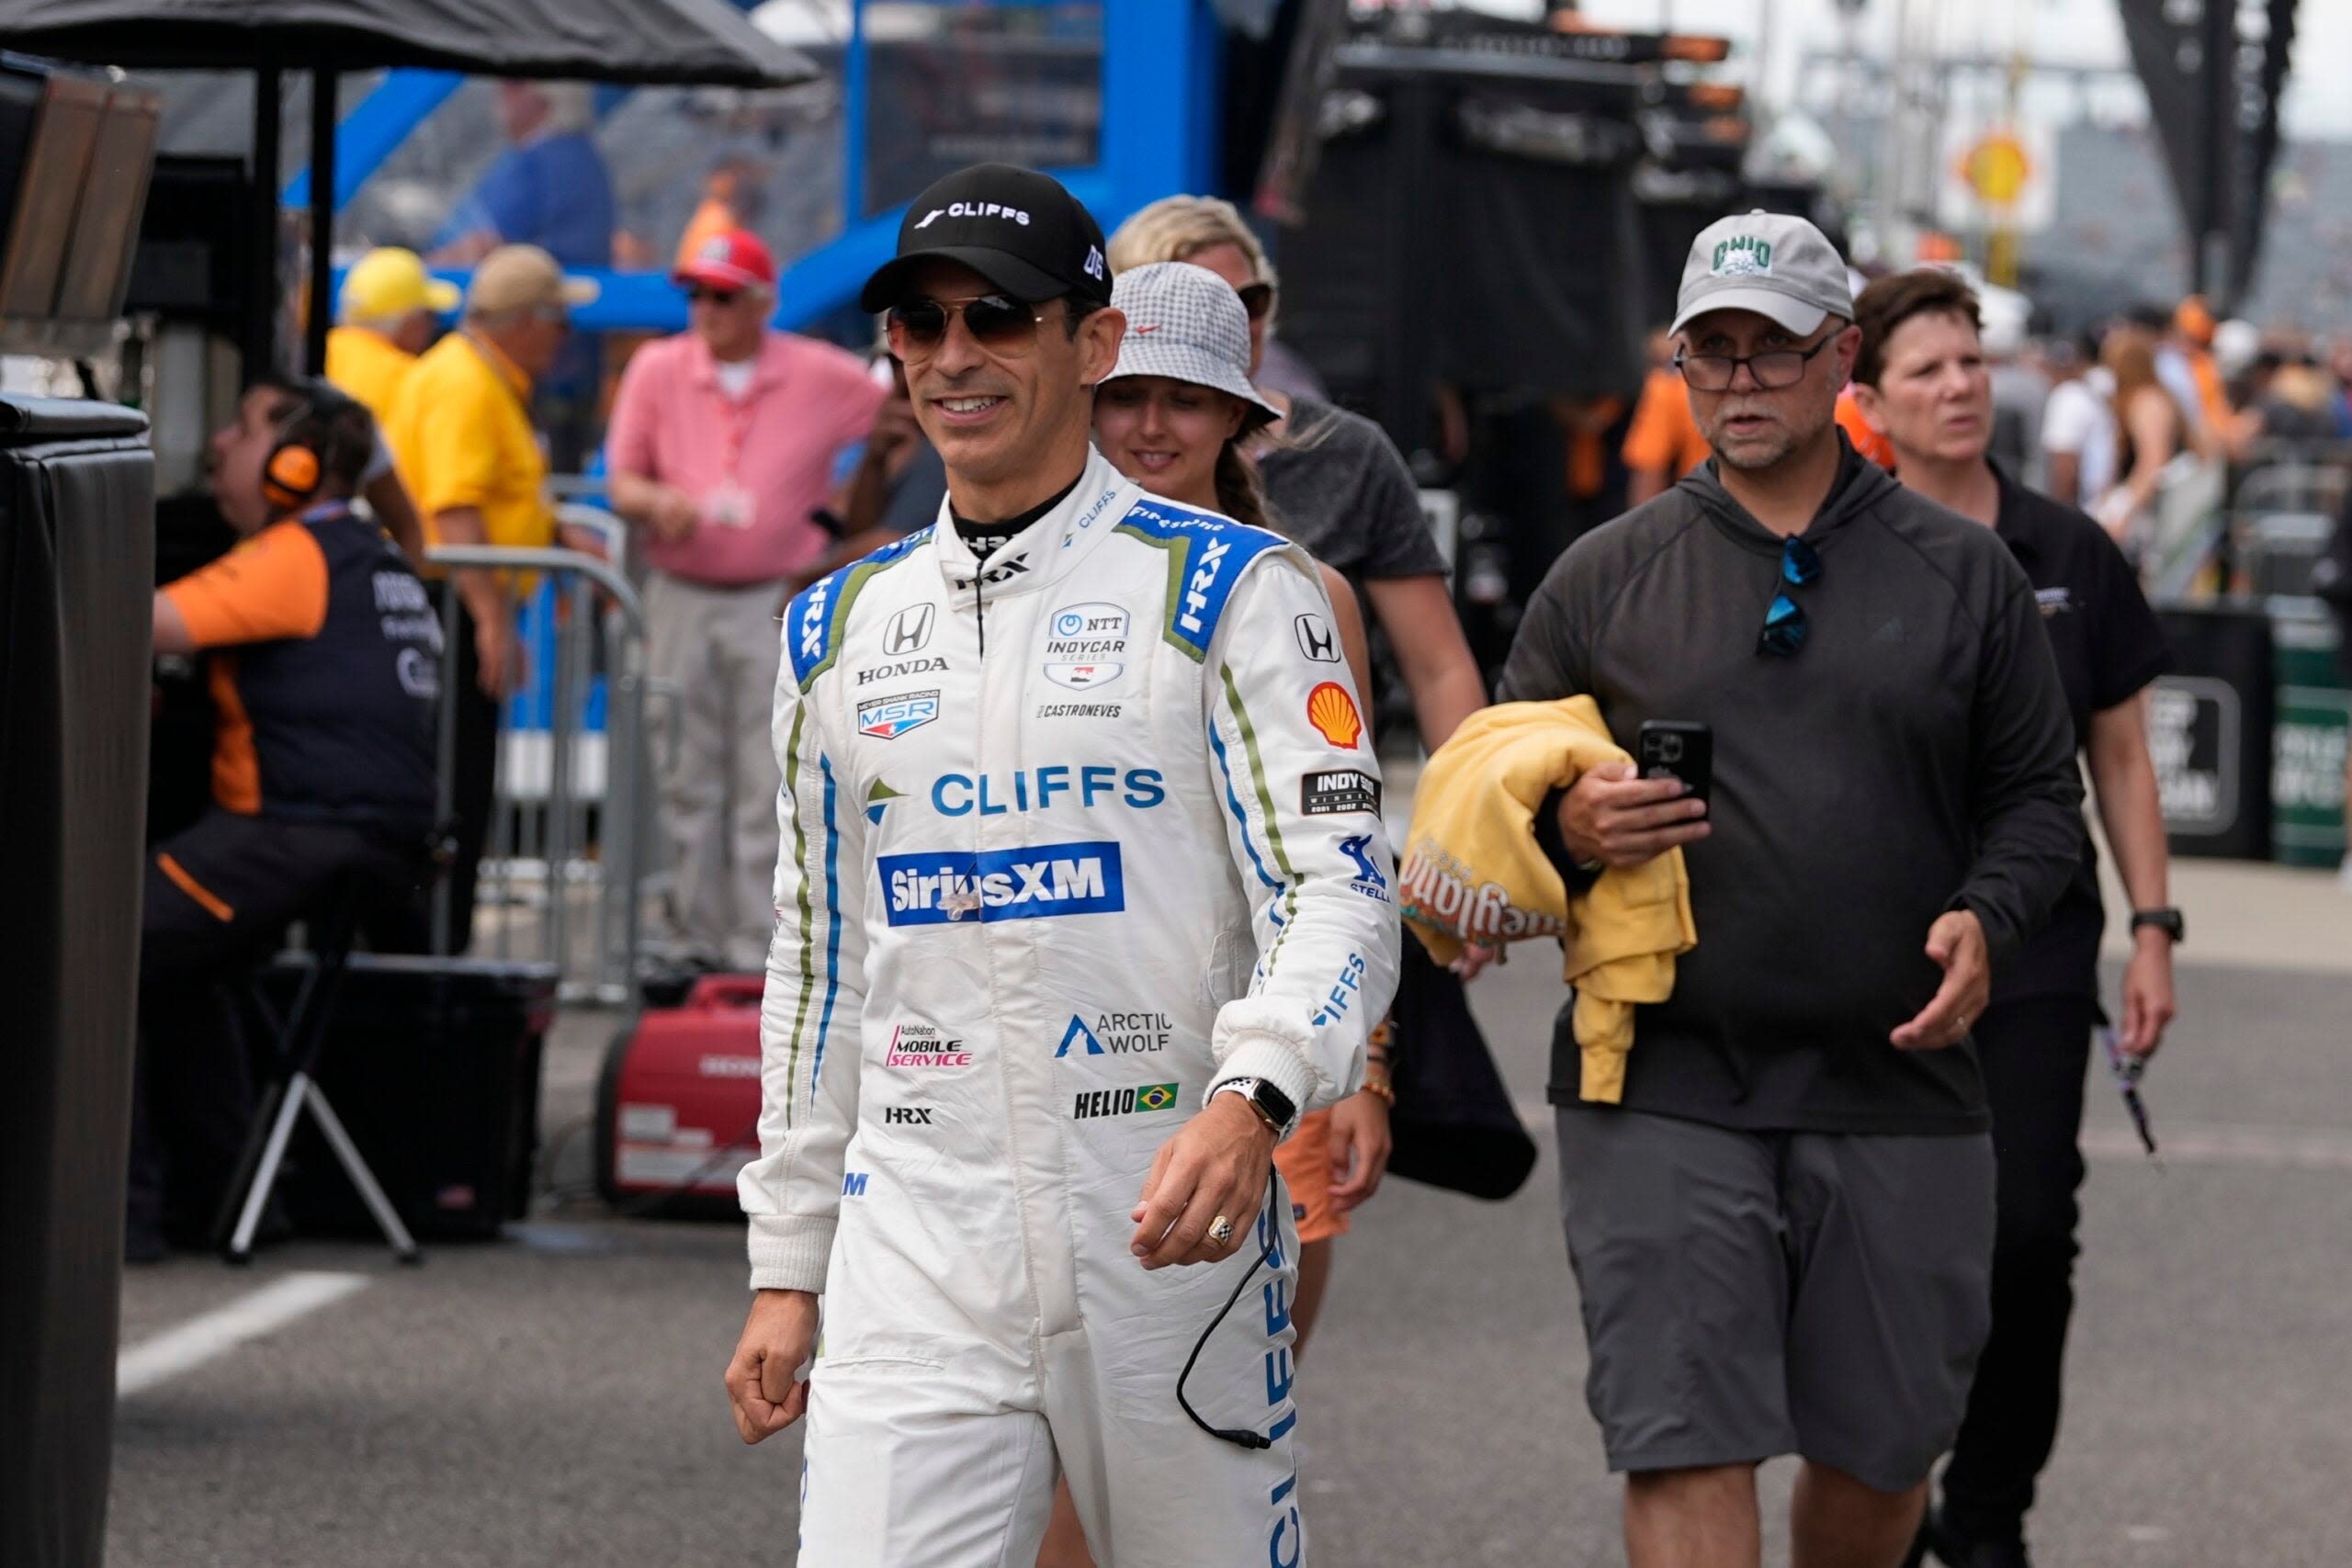 Intriguing Indy 500 storylines surround Row 7 lineup with Andretti, Castroneves and Dixon